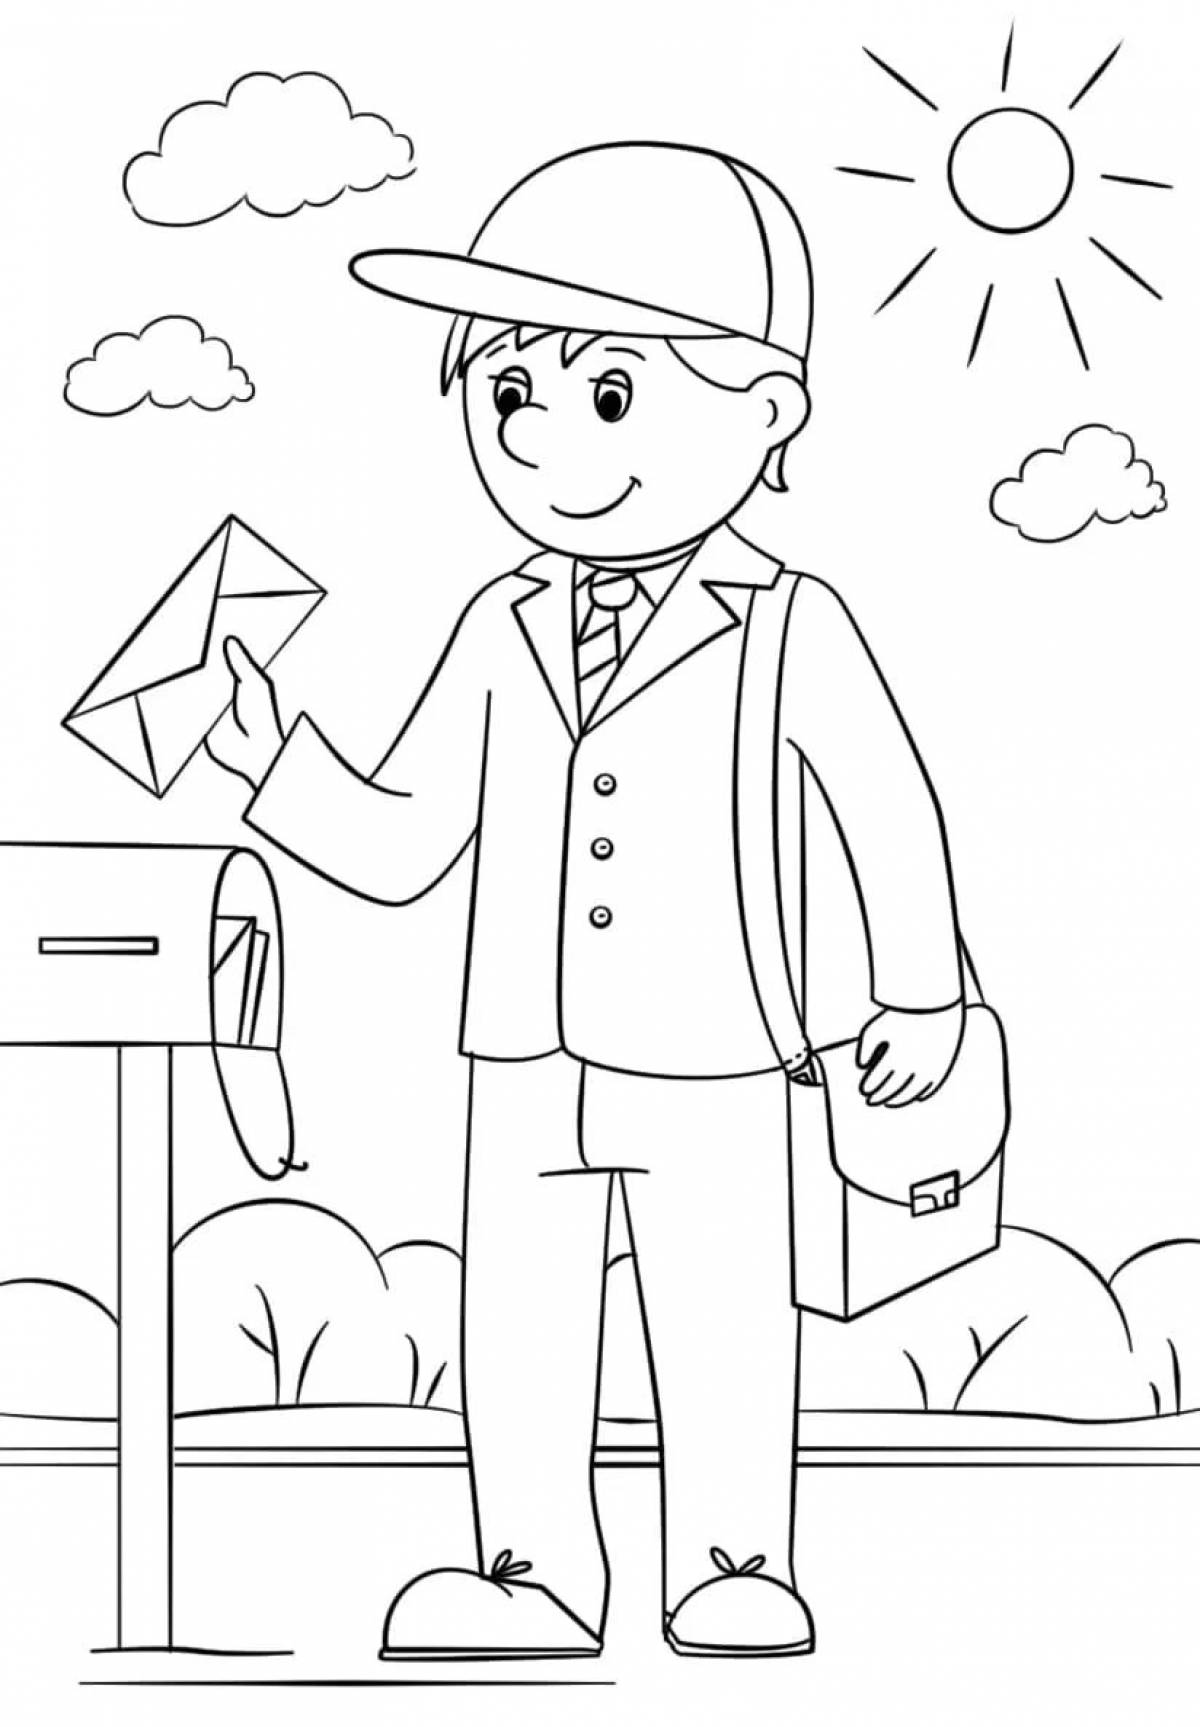 Mysterious man coloring page